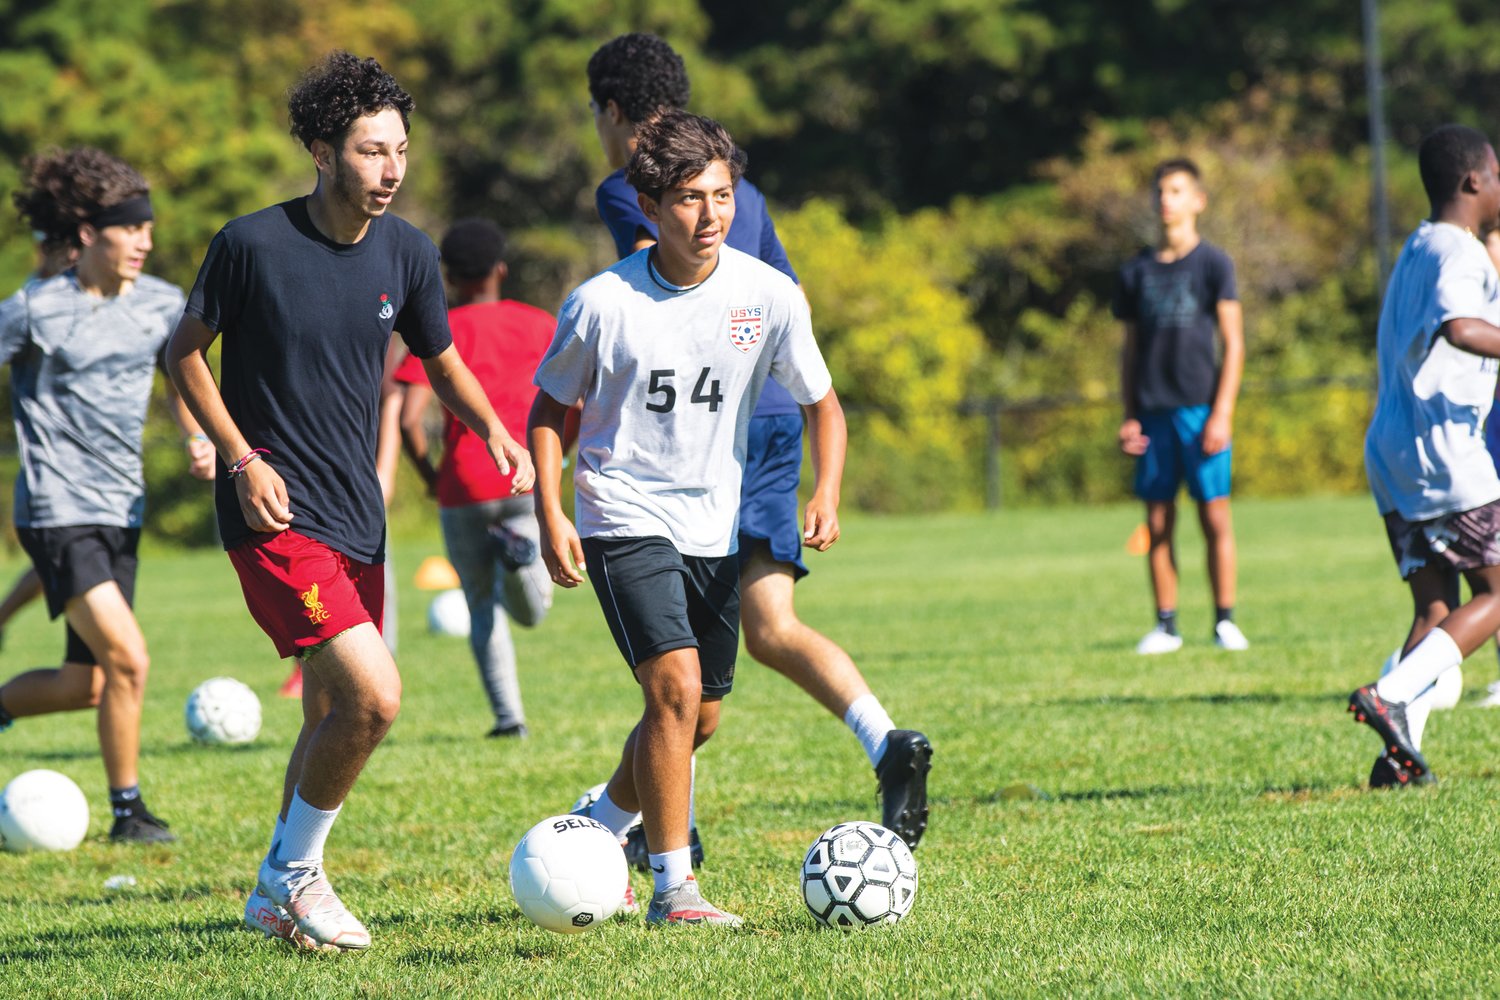 Alejandro Chacon and Jose Aguilar during boys soccer practice drills at Nantucket High School Tuesday.